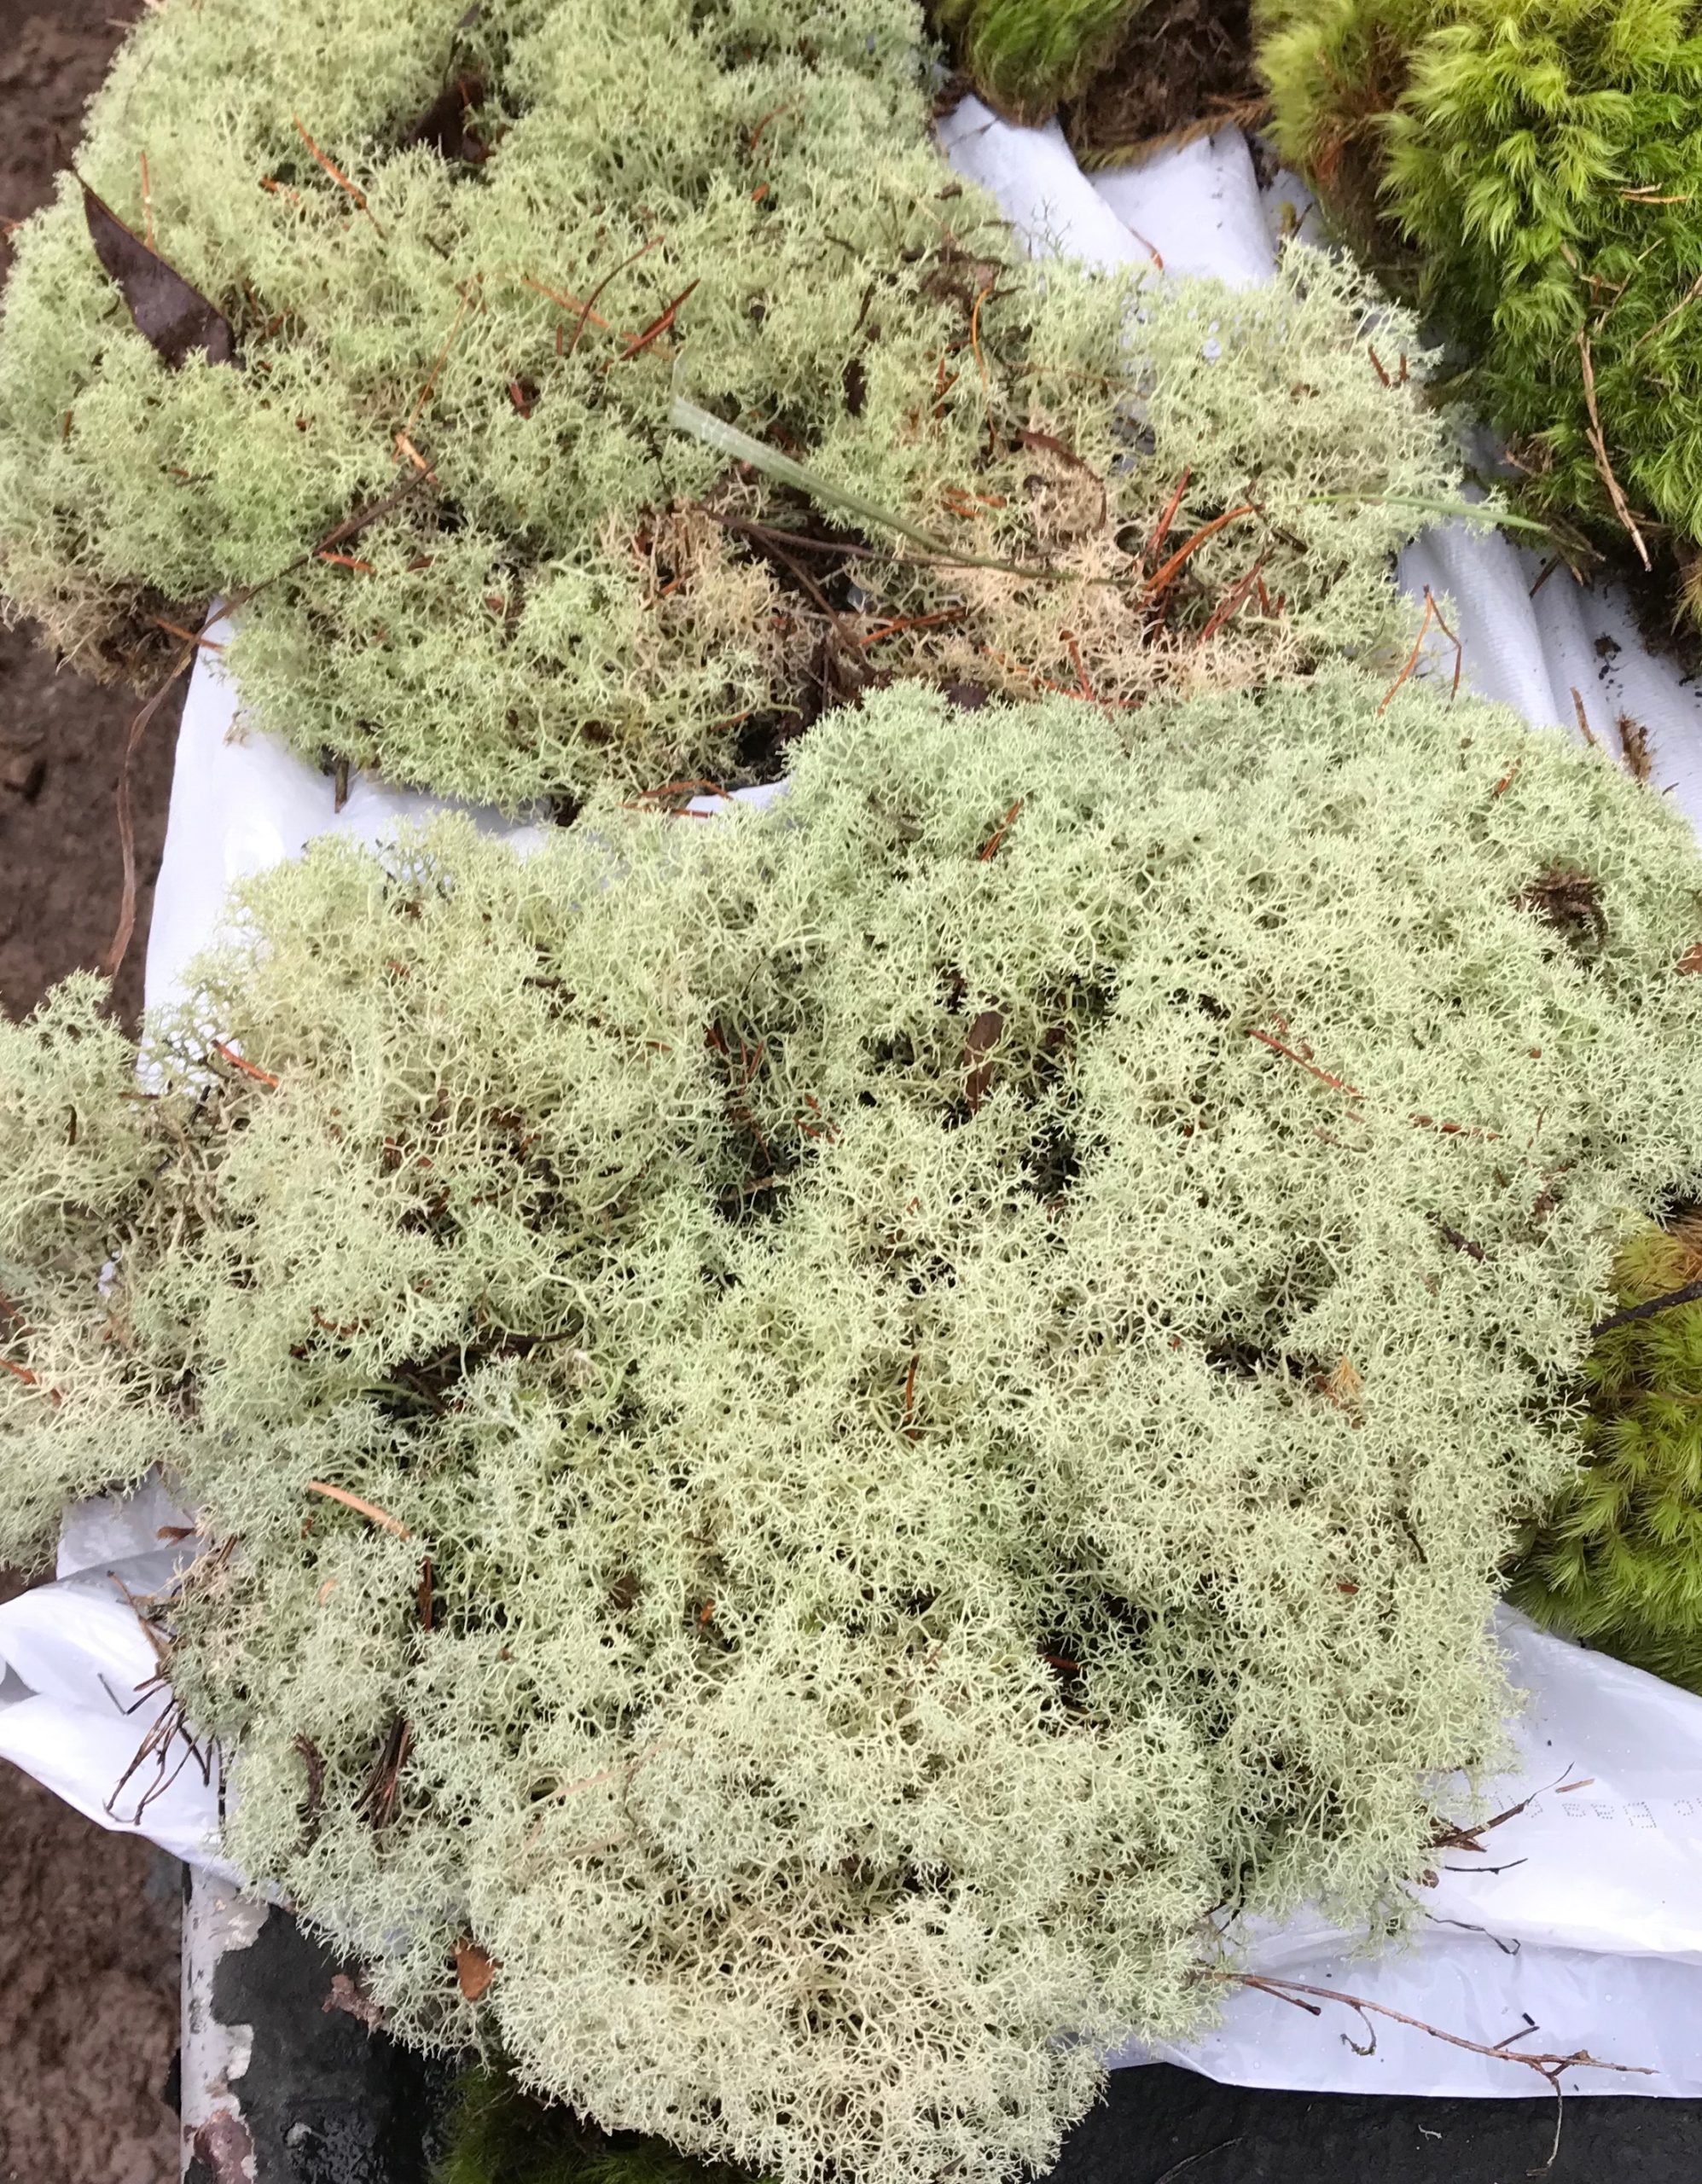 Natural Preserved Colored Reindeer Moss 1 LB Colorful Moss, Art